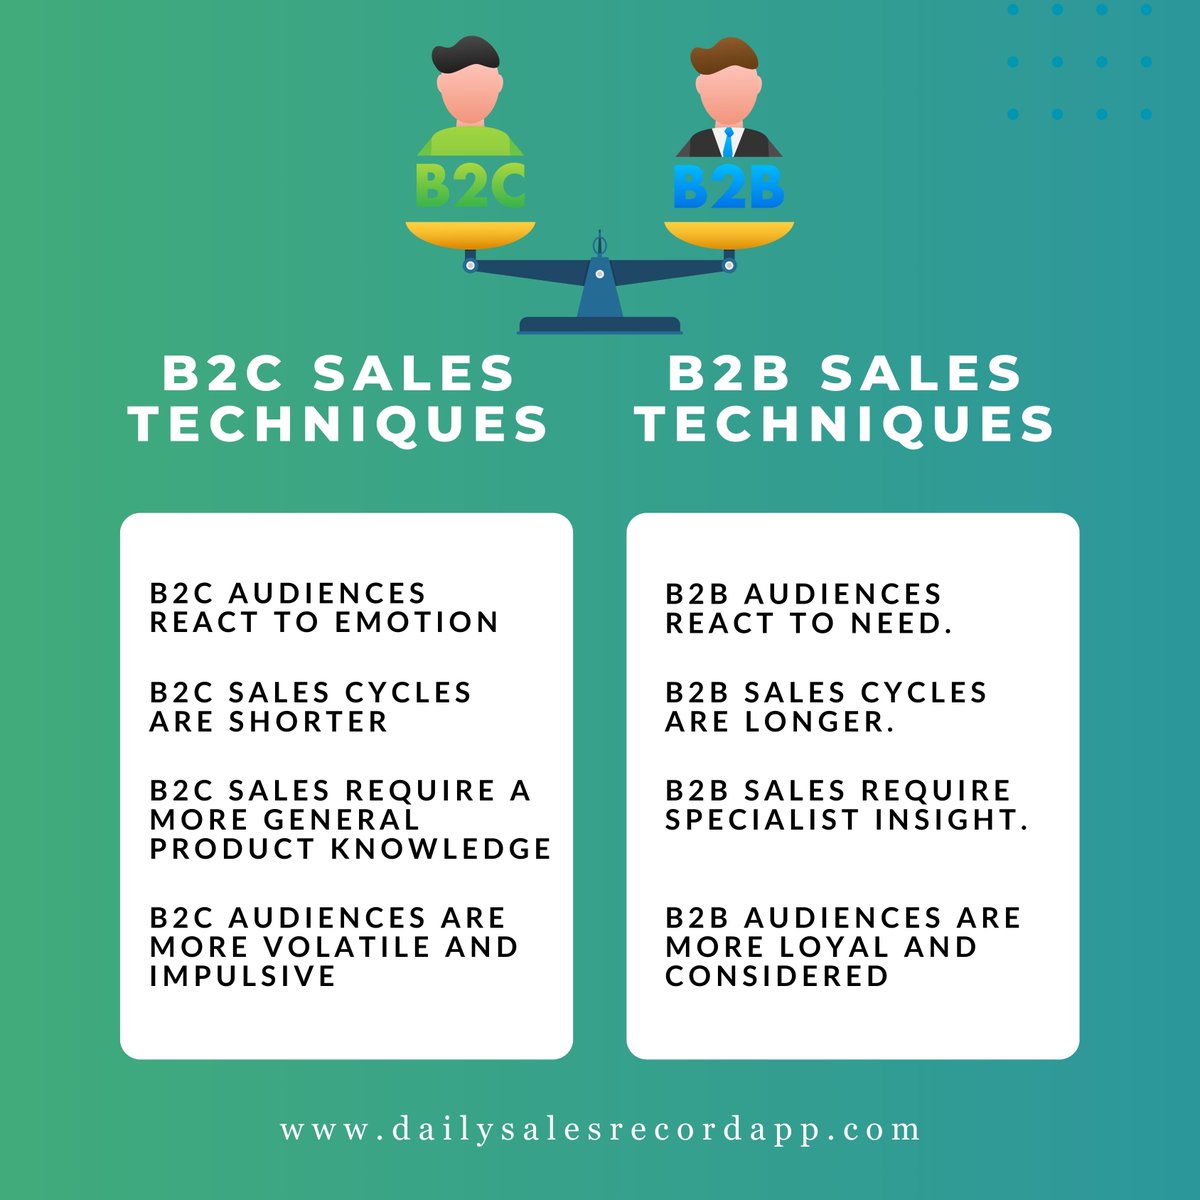 Sales techniques every sale person should know.

#salestips #salesskills #closingdeals #negotiationtactics #customerengagement #pitchperfect #productknowledge #clientrelationships #upsellingsecrets #crossselling #leadgeneration #followupgame #listeningskills #problemsolving